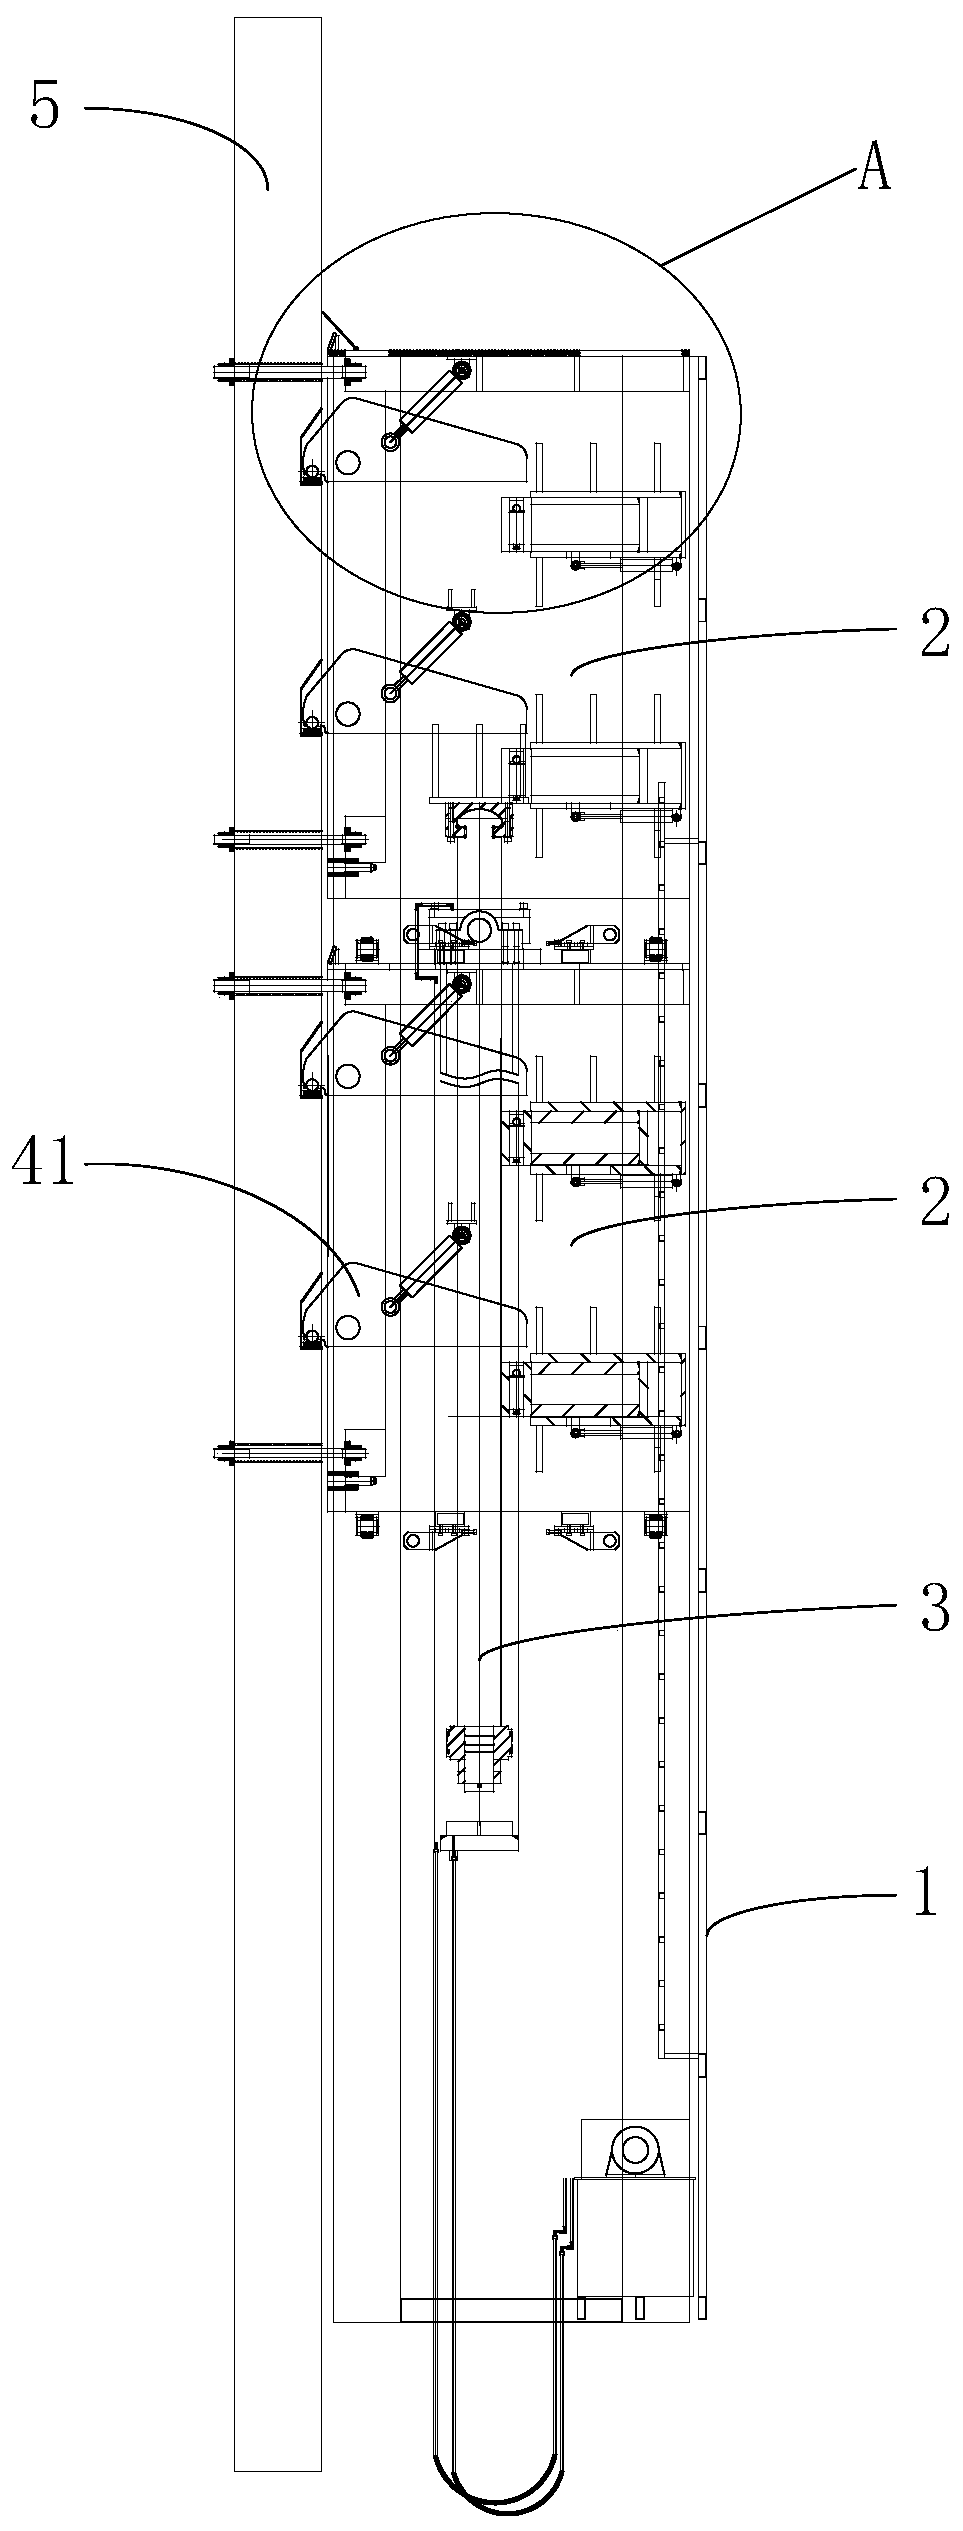 Overturning gripper wall-attached jacking equipment and jacking method thereof